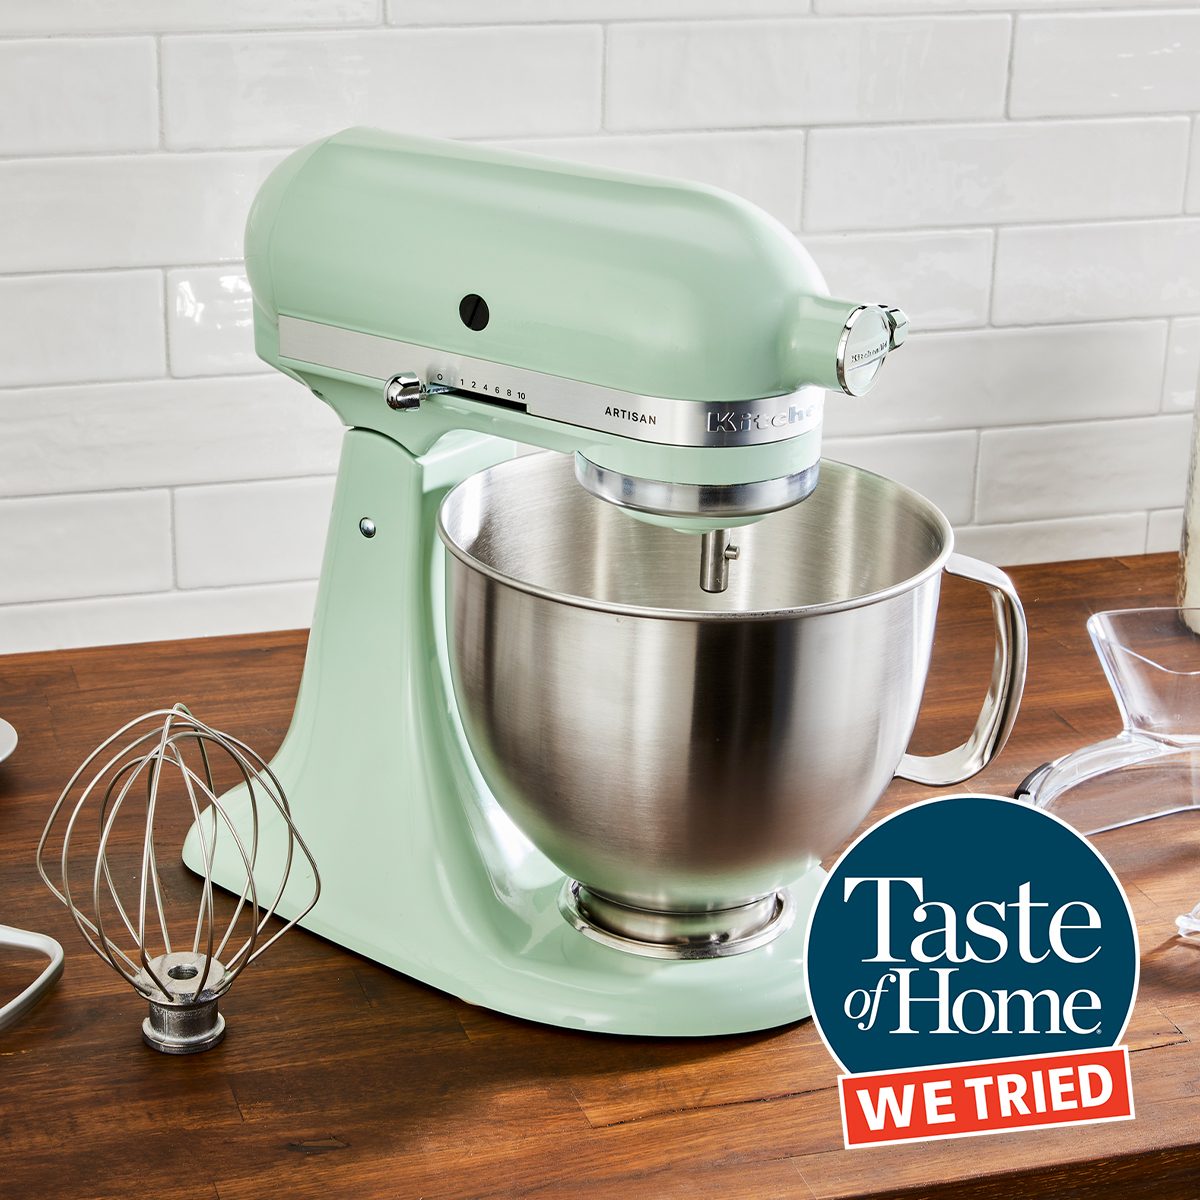 The KitchenAid Stand Mixer: Do You Really Need To Buy One?